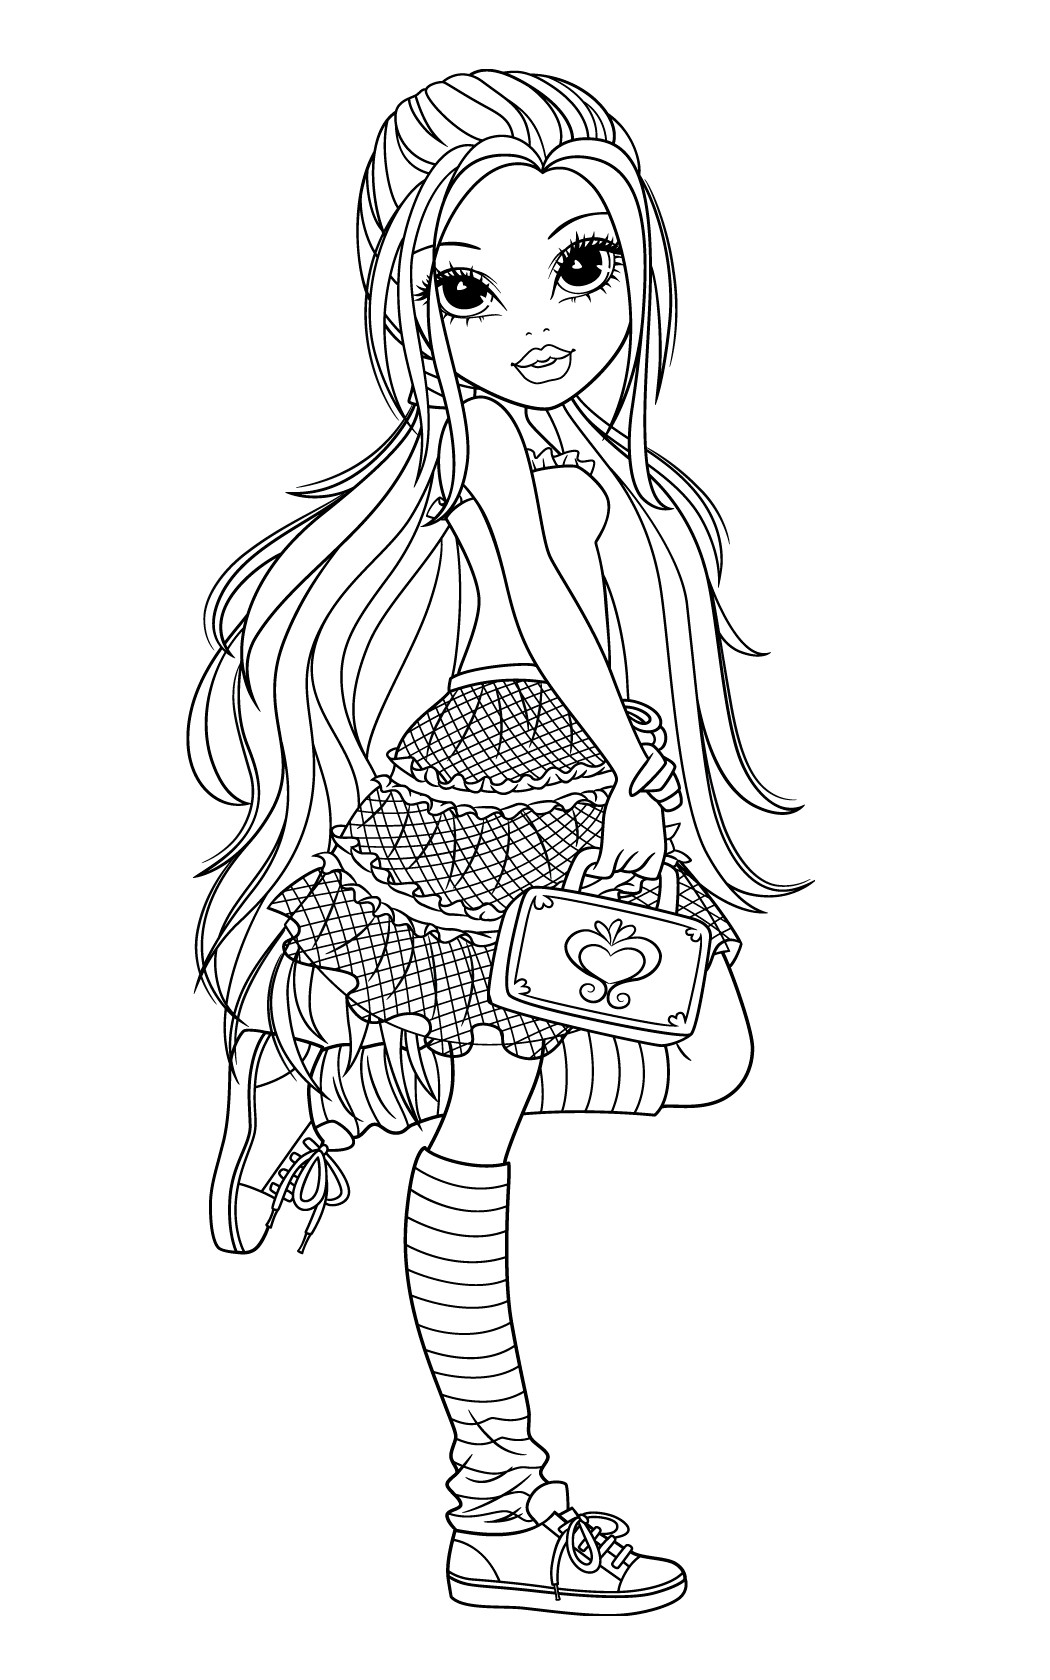 Coloring Sheets For Girls
 New Moxie Girlz Coloring Pages will be added frequently so